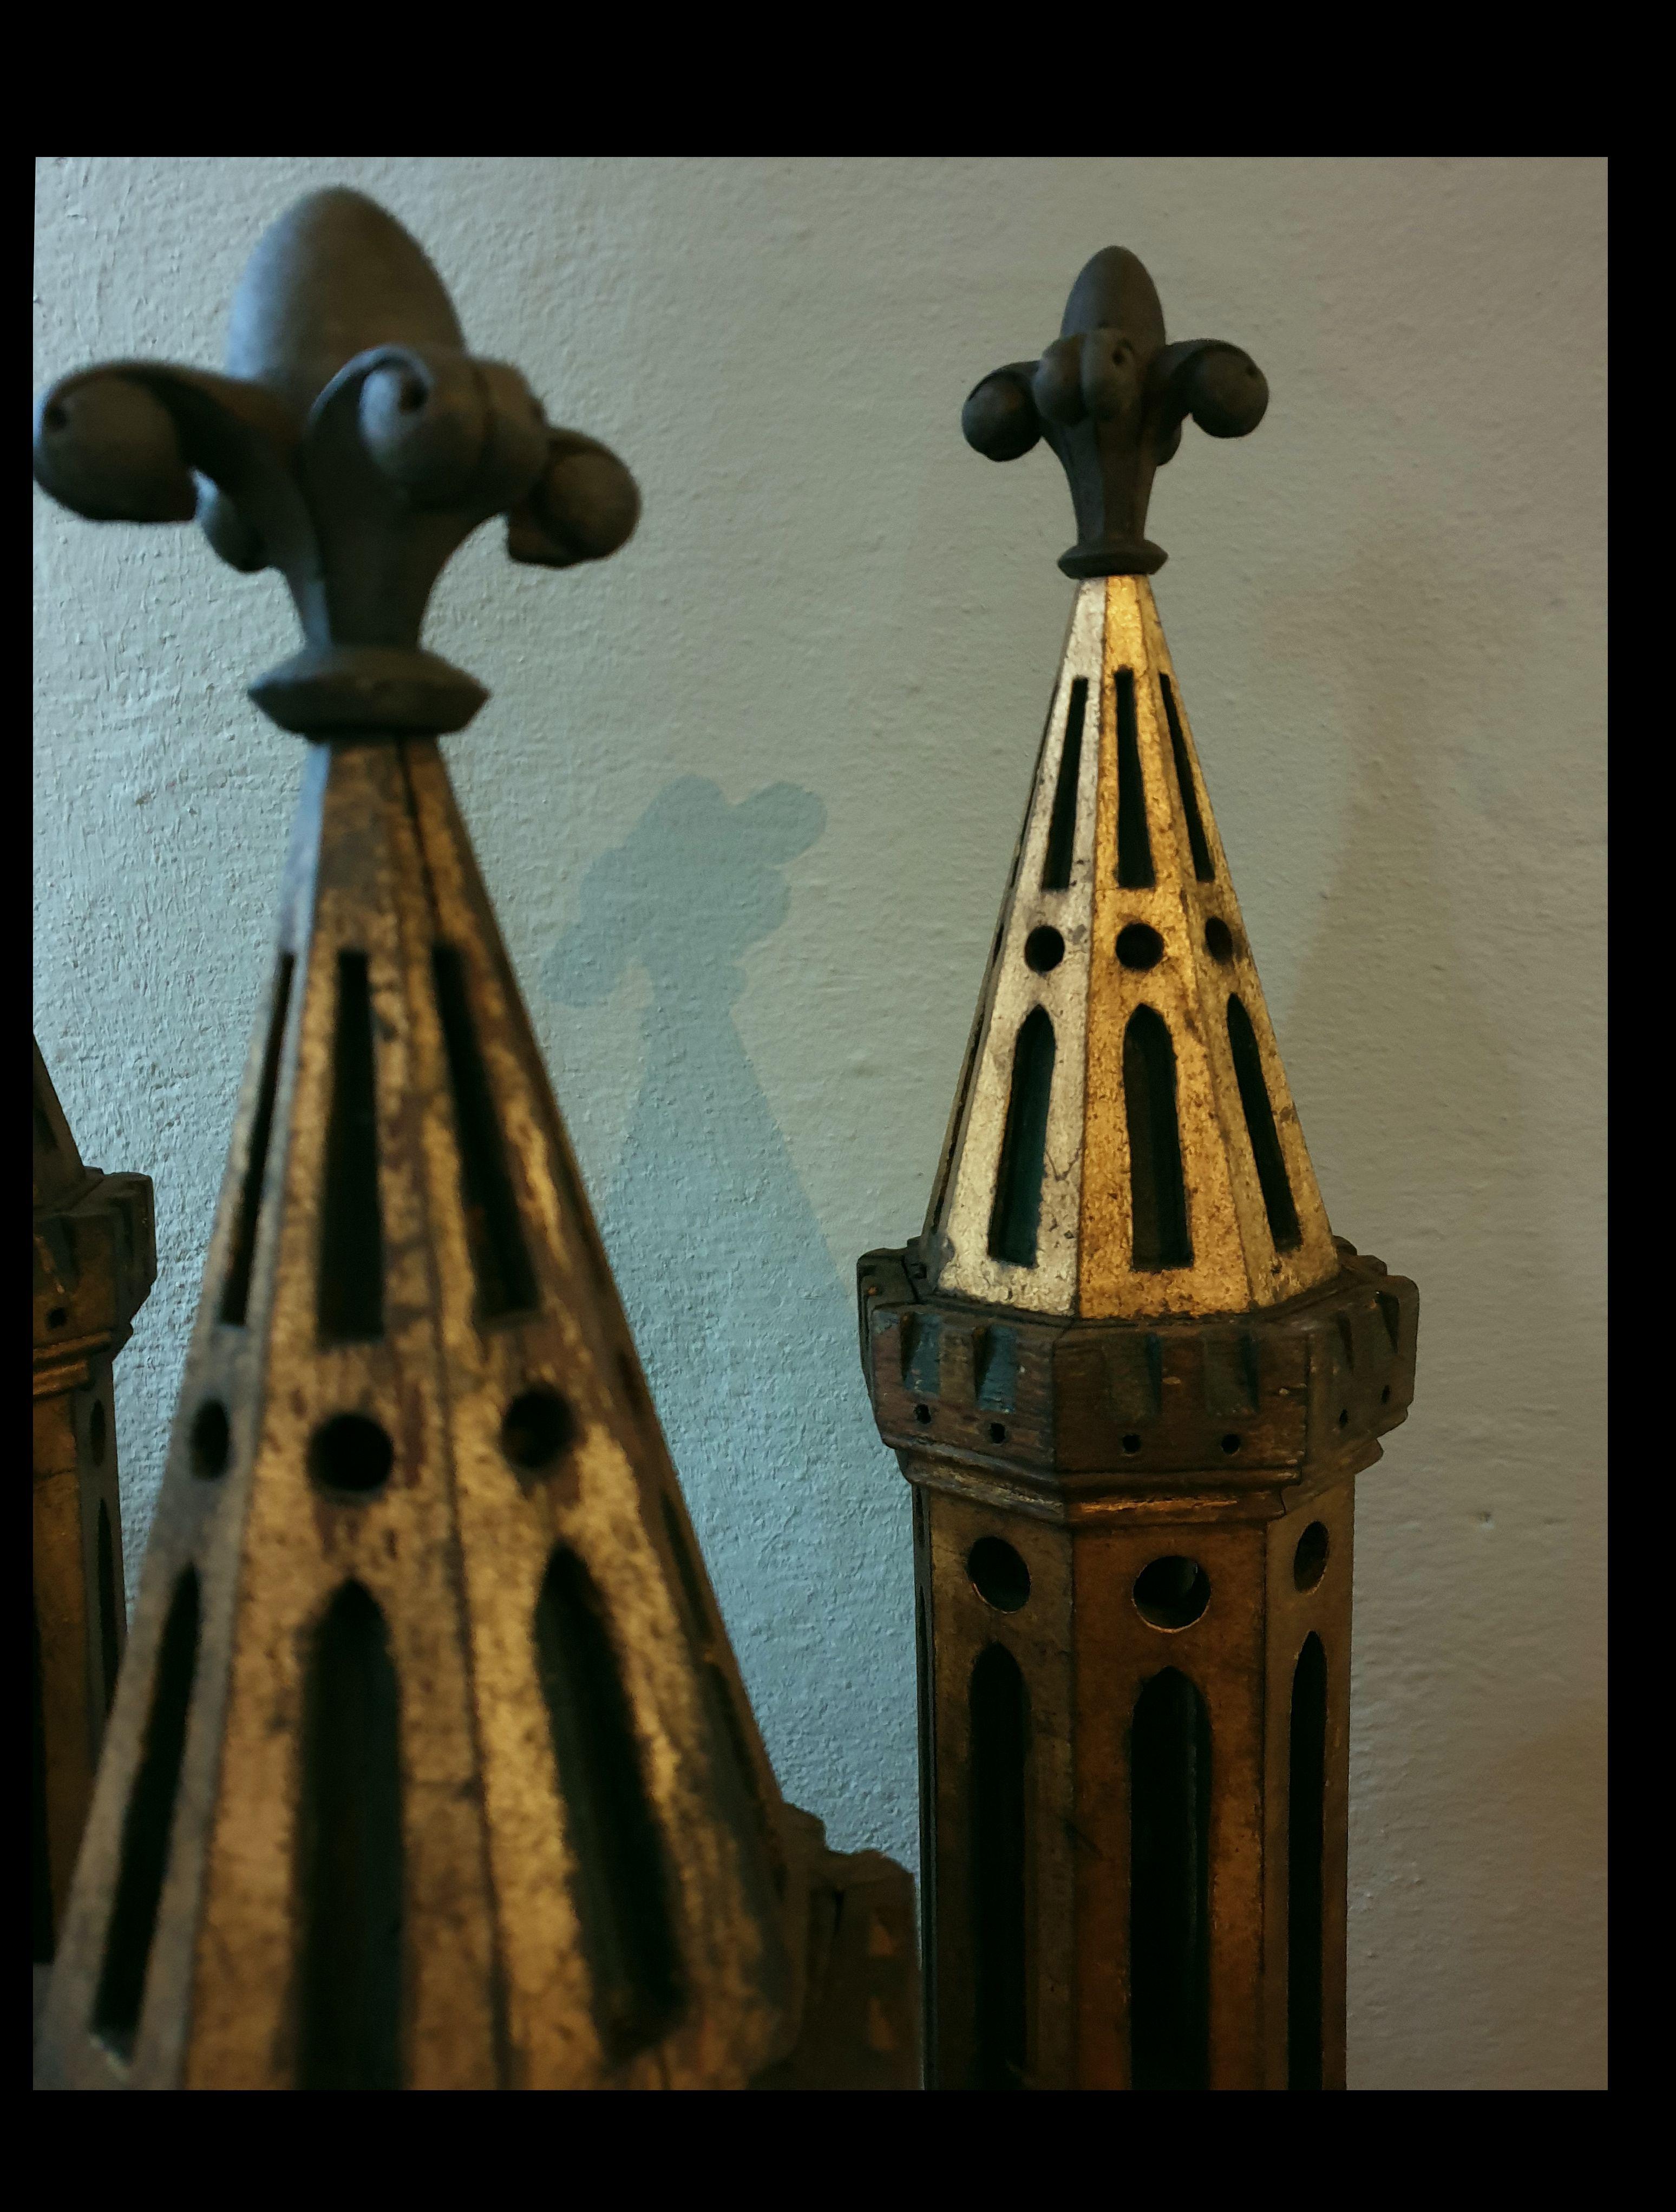 Gothic 3 Decorative Architectural Church Tower Models For Sale